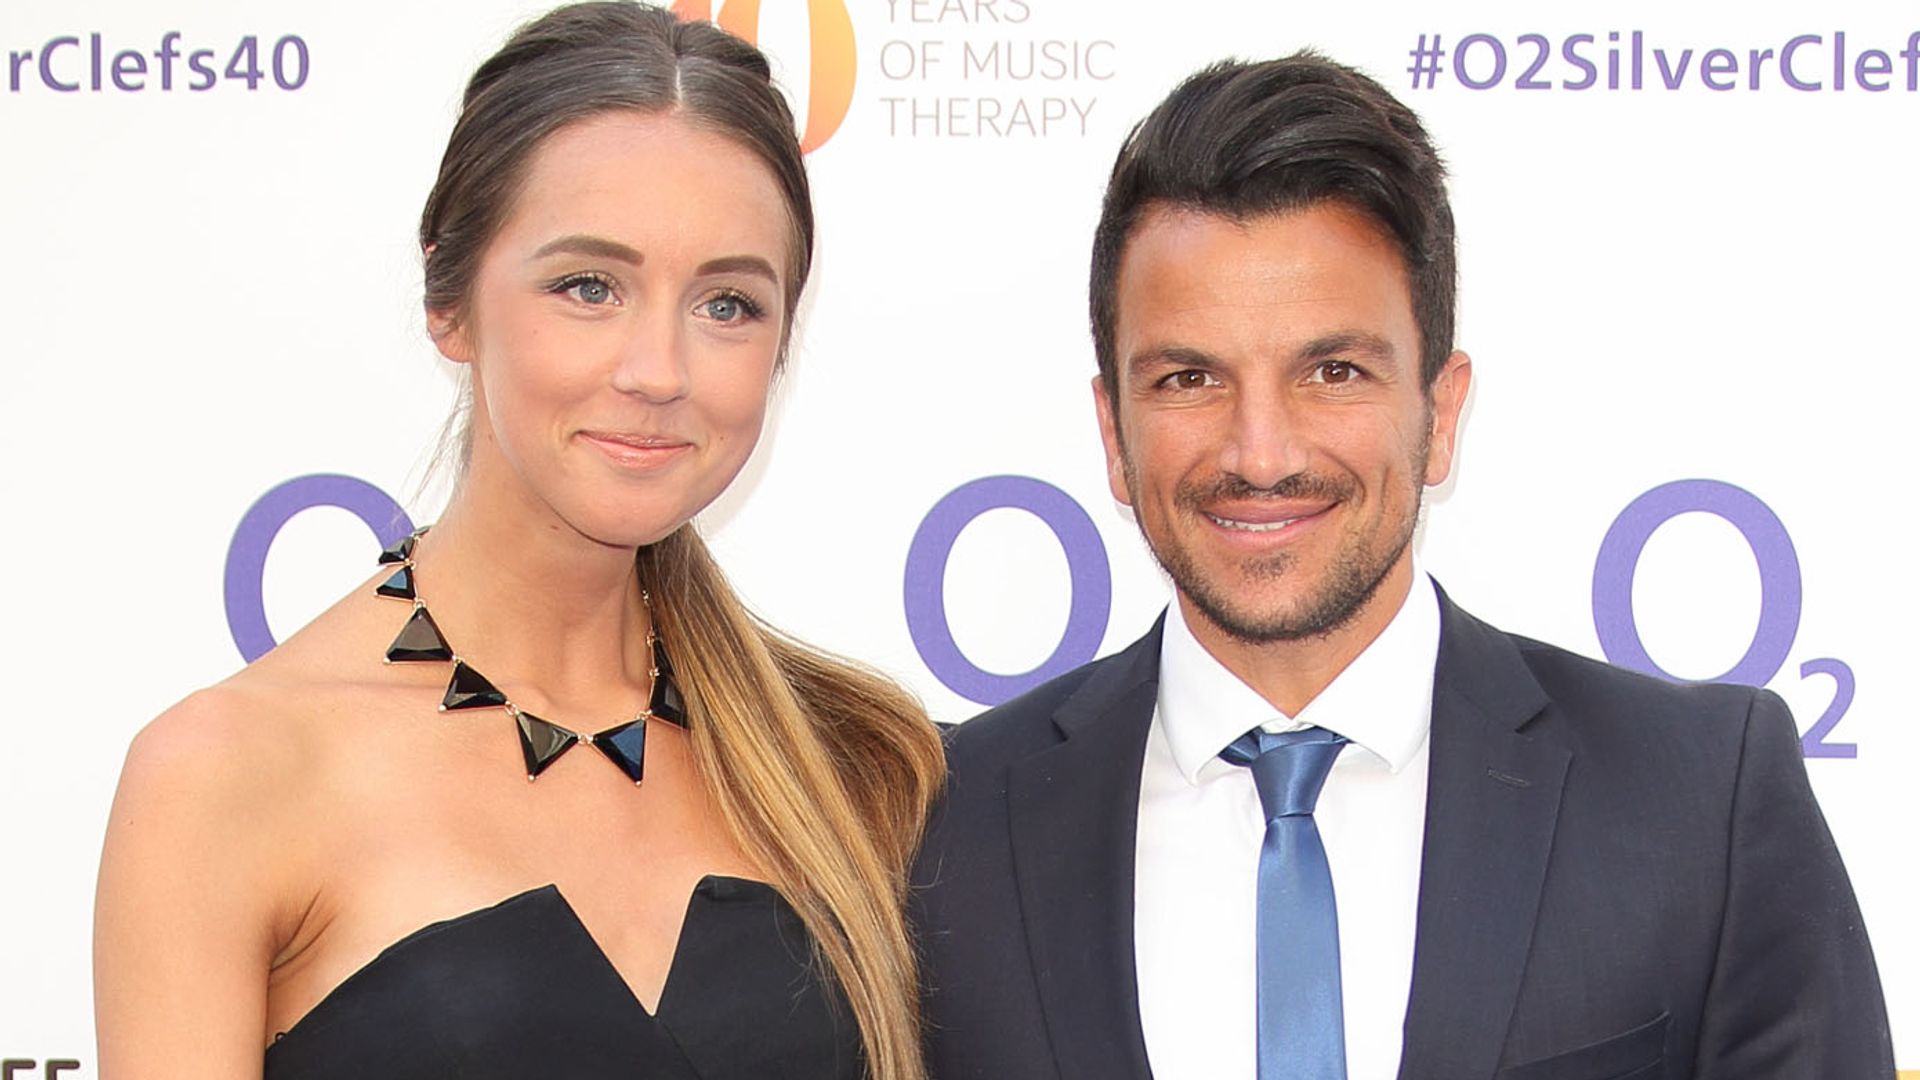 Emily Andre in a white dress standing with Peter Andre in a suit